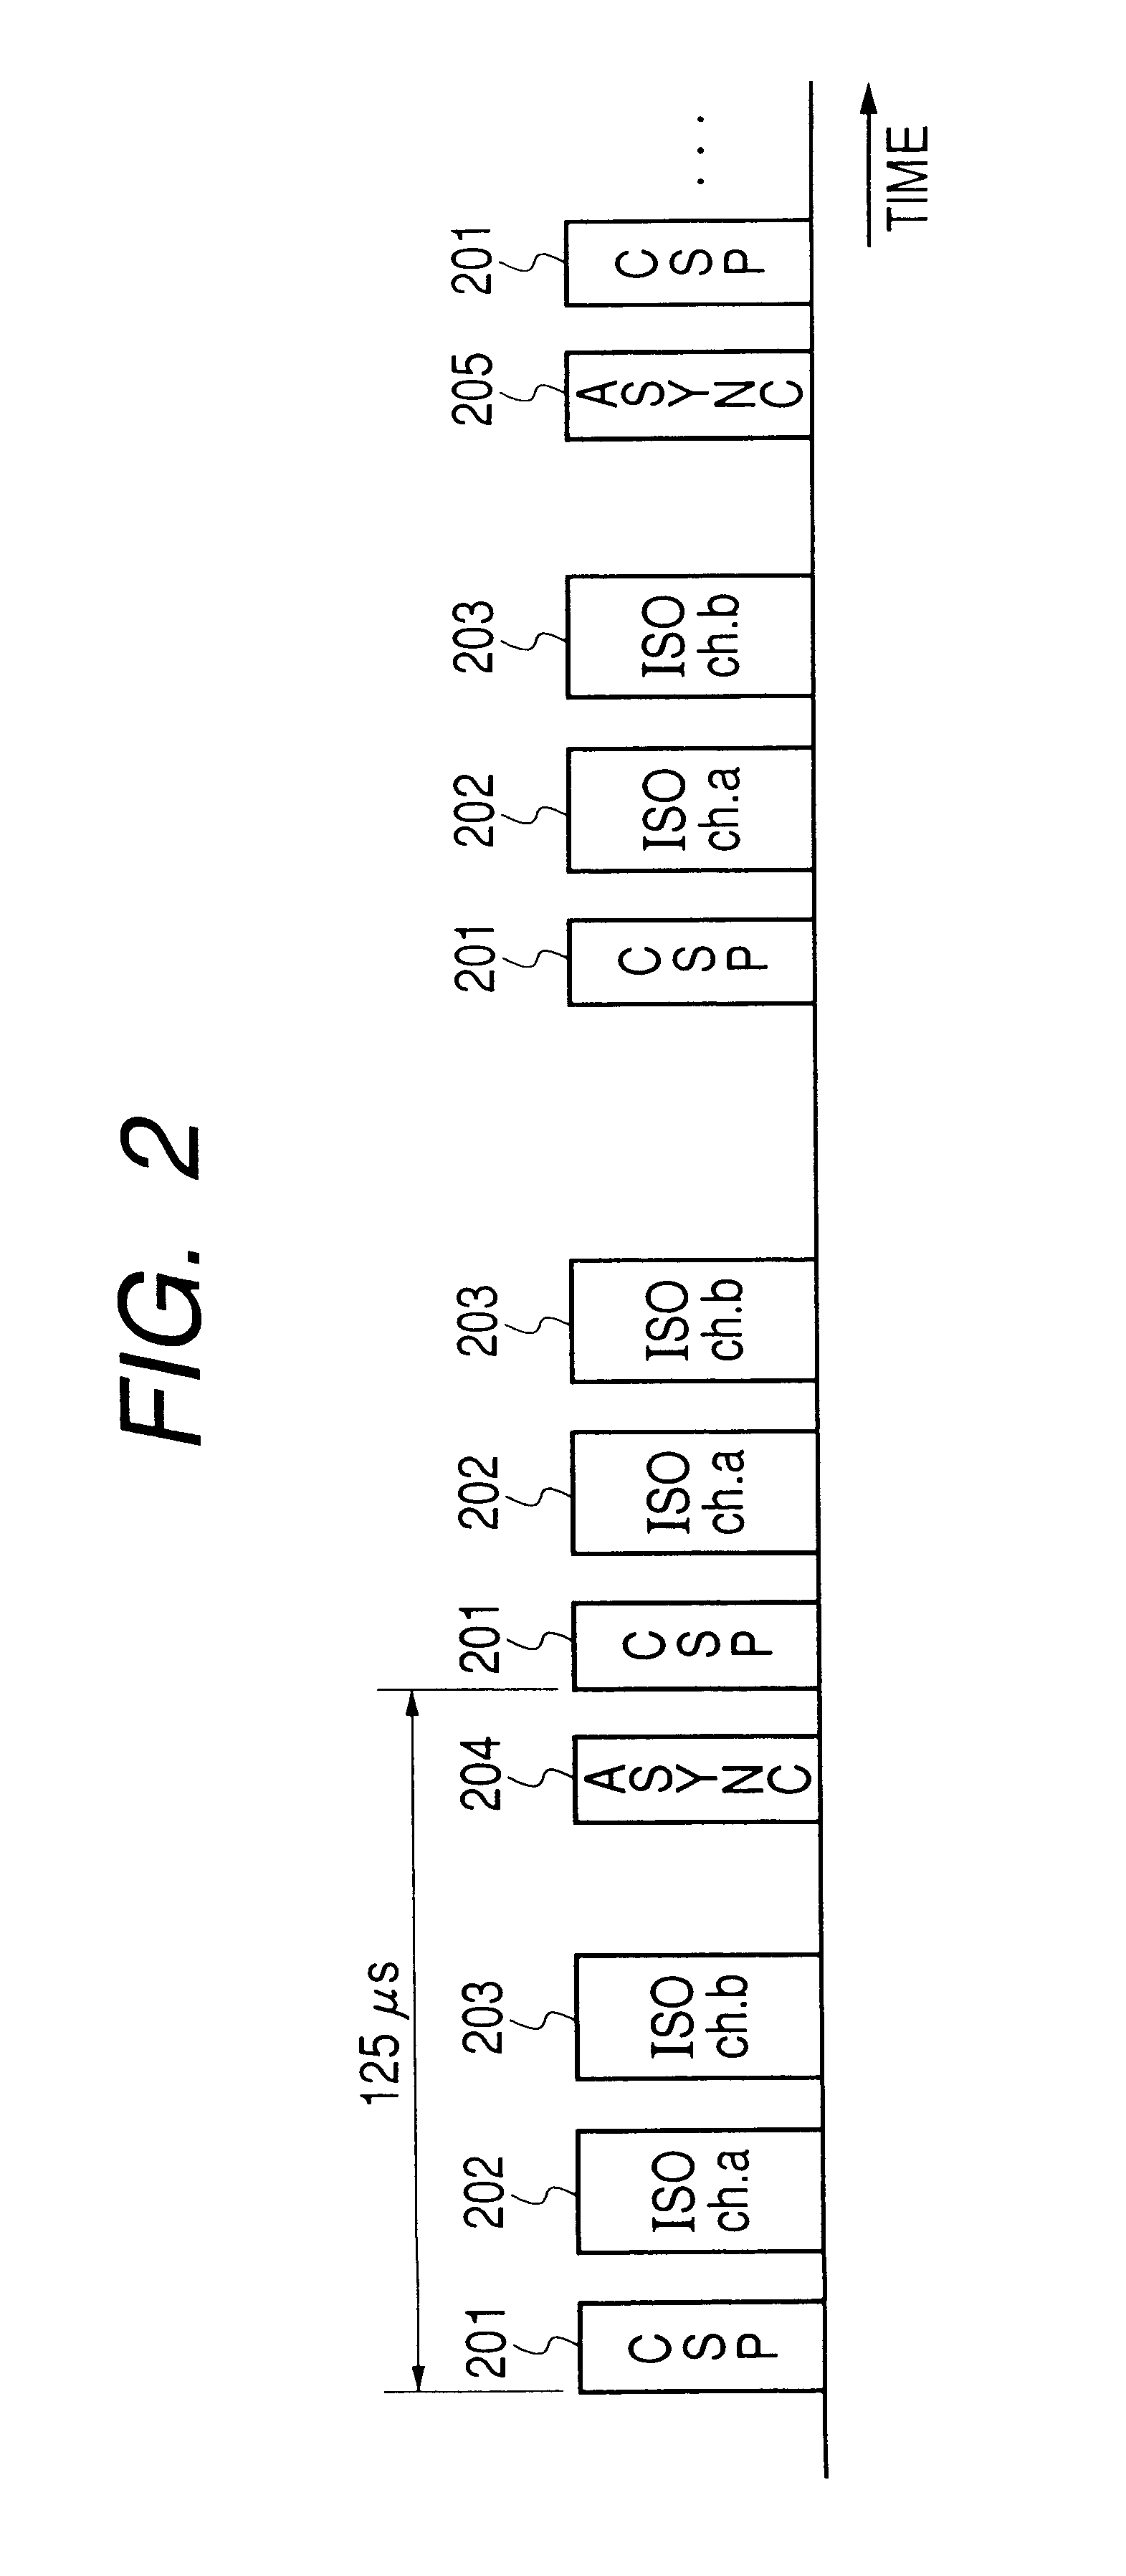 Method and apparatus for controlling the functions of an image capturing apparatus